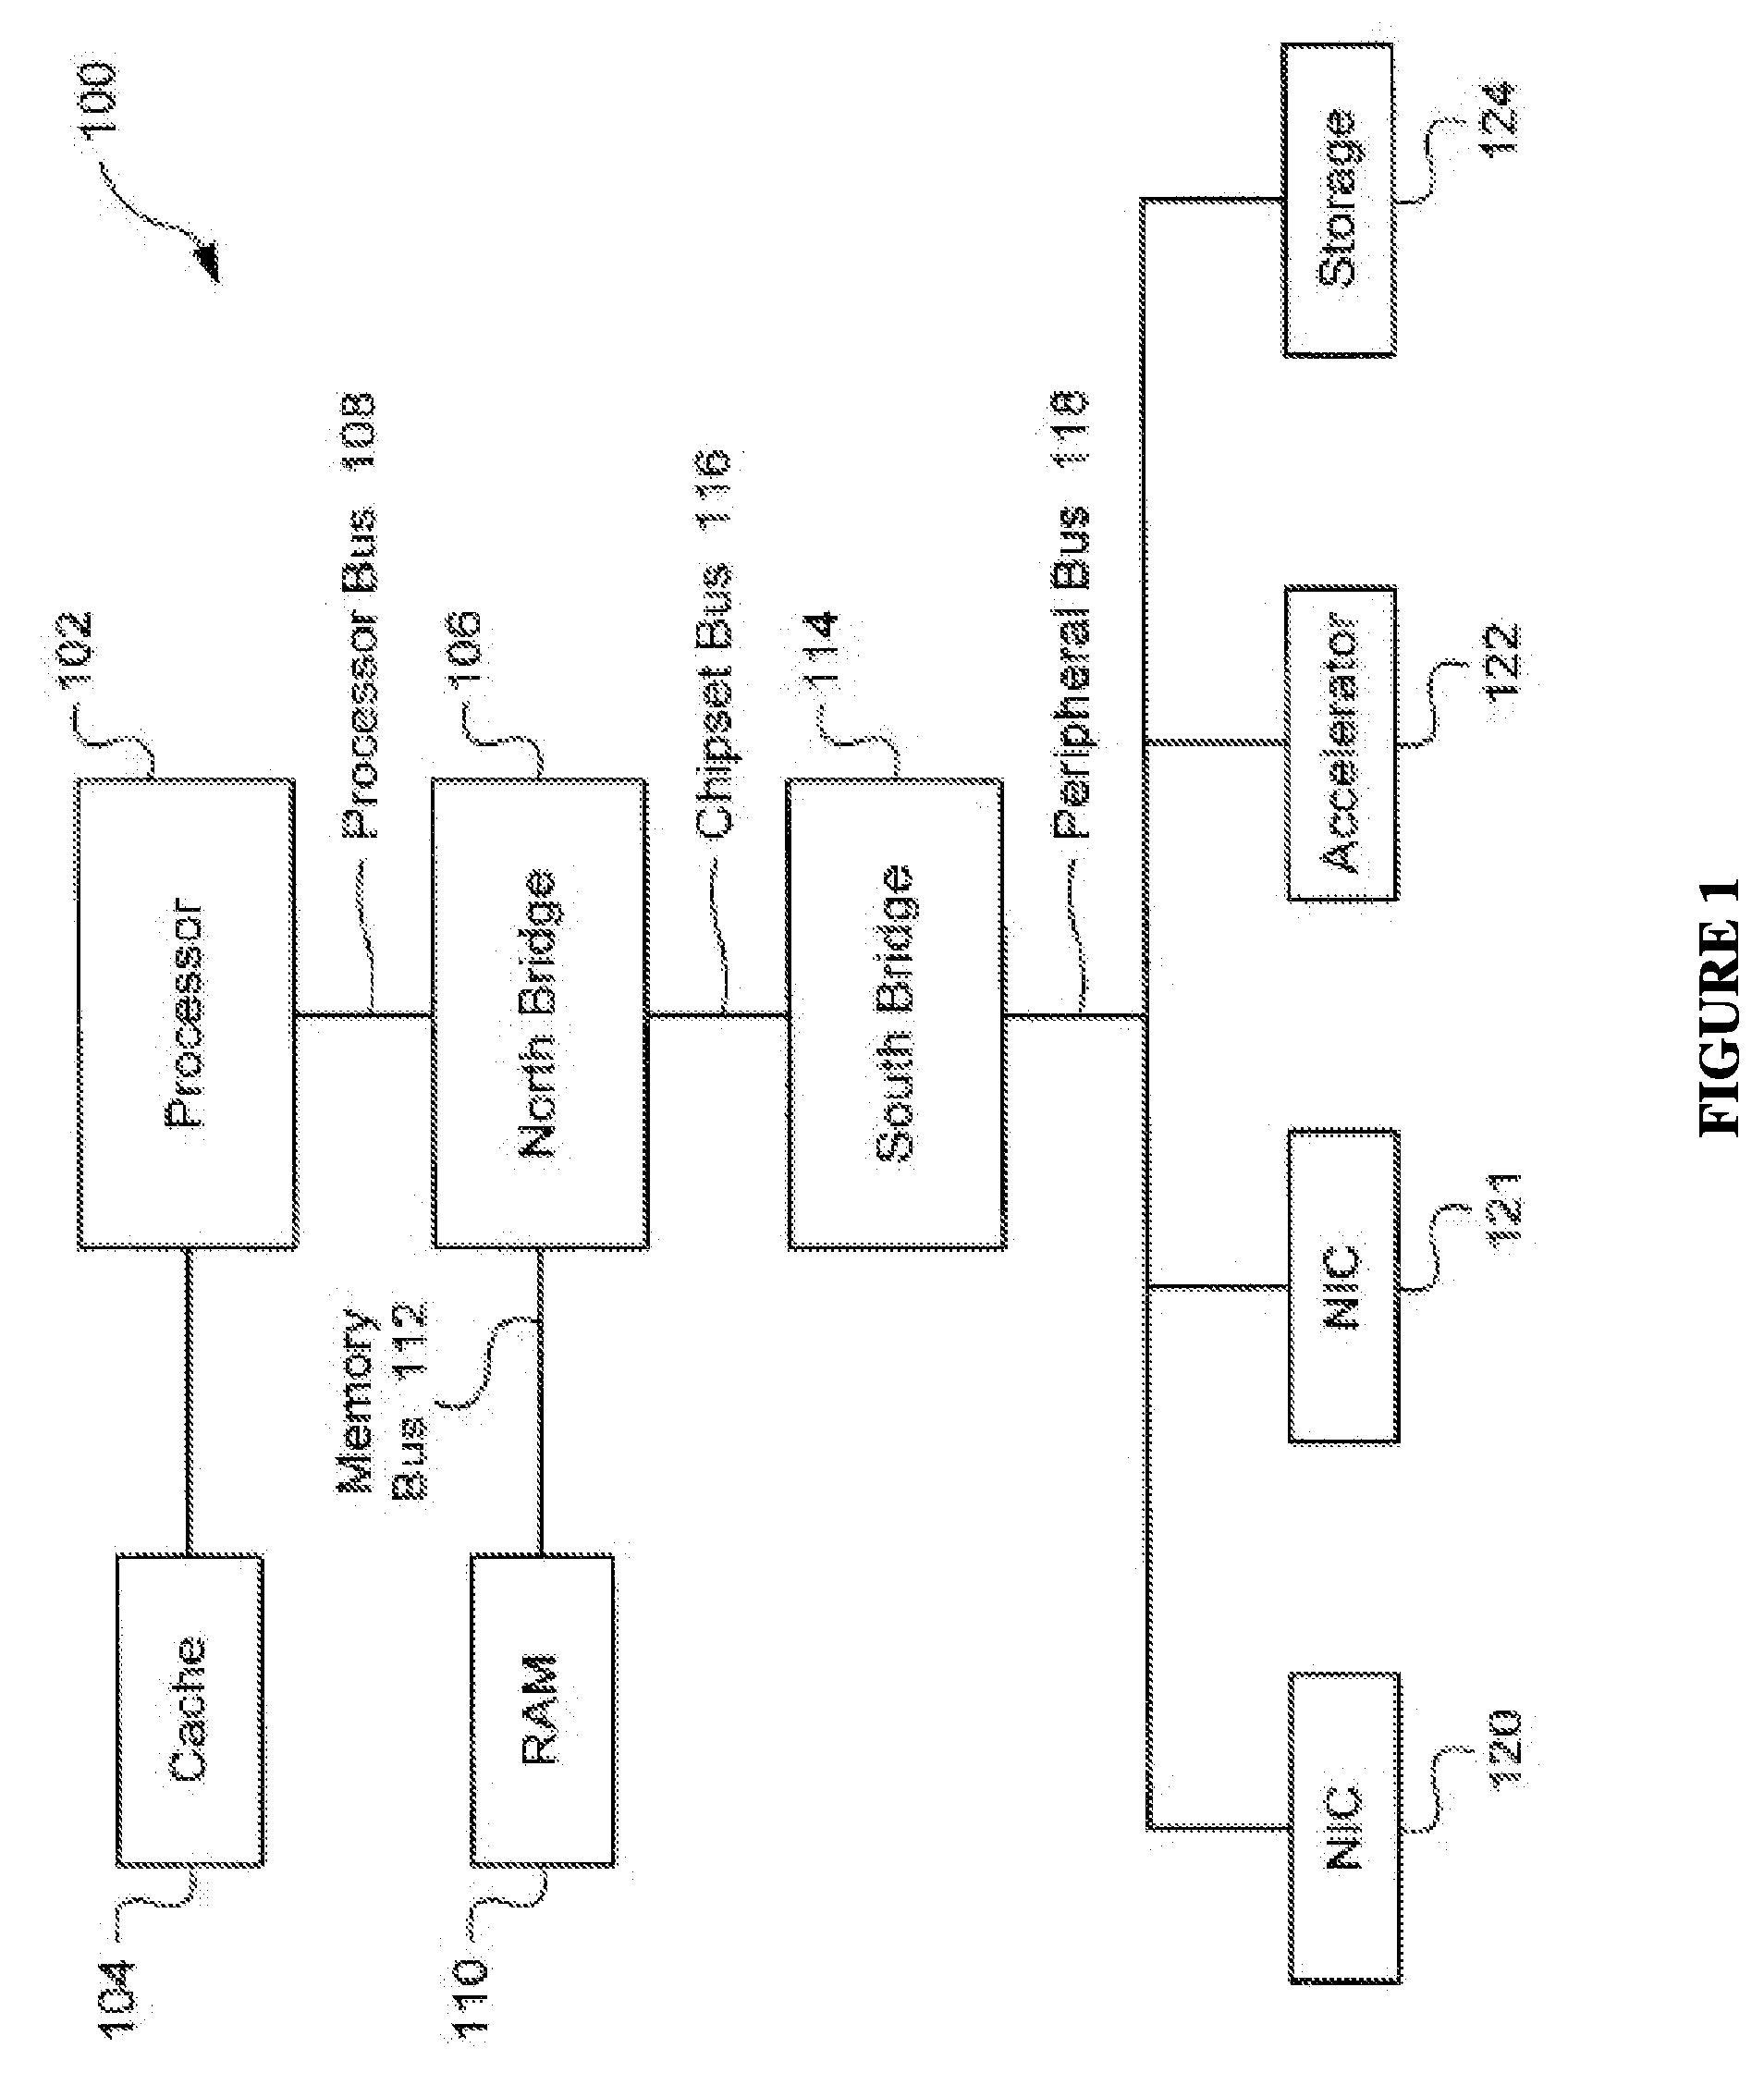 Health care device and systems and methods for using the same